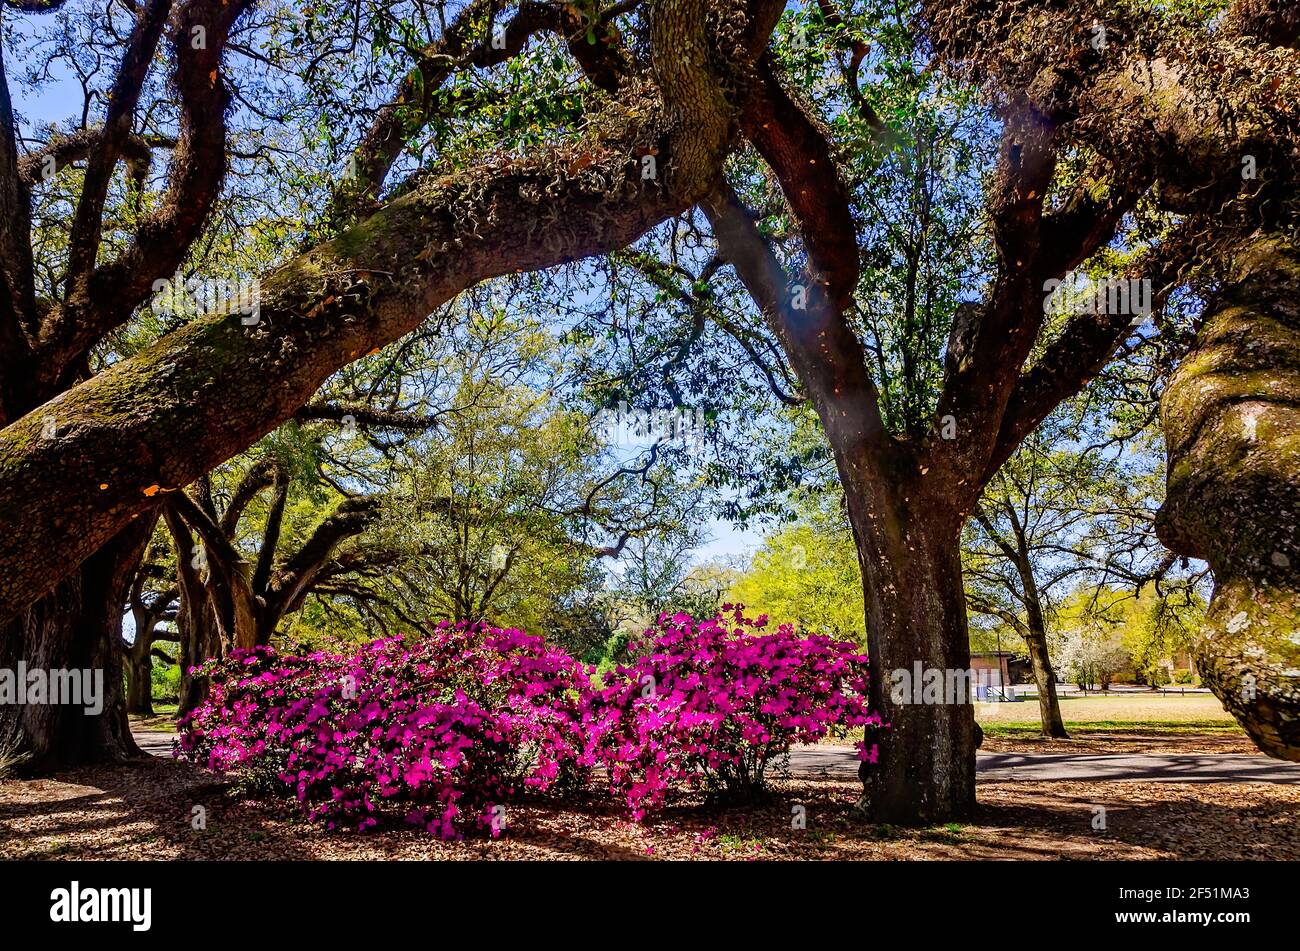 Pink azaleas bloom along the Avenue of Oaks at Spring Hill College, March 21, 2021, in Mobile, Alabama. Mobile is known as the Azalea City. Stock Photo